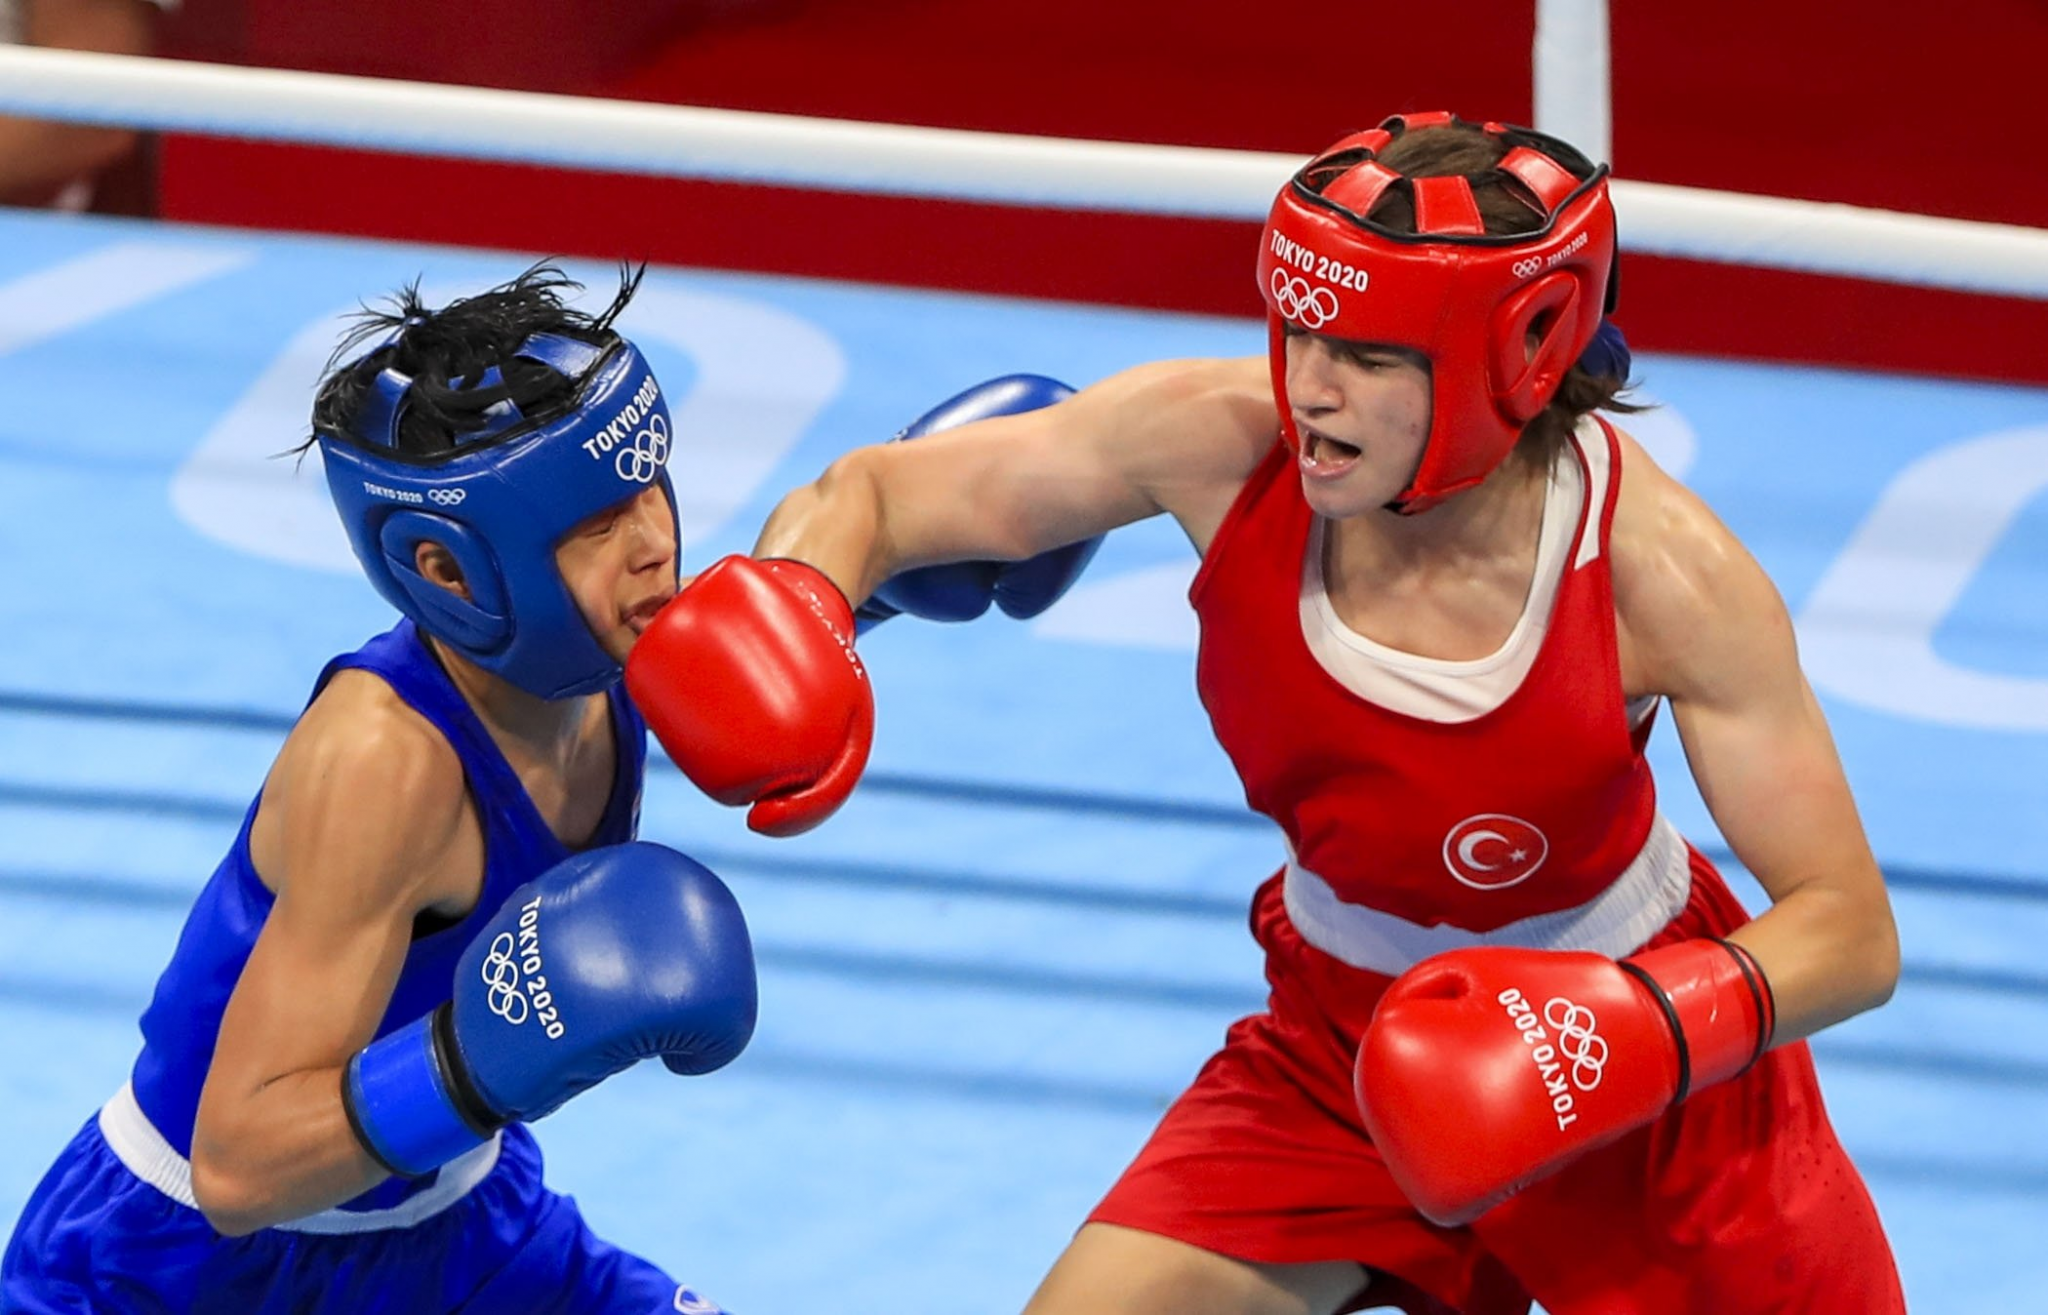 Boxing's Olympic future remains in doubt due to a lack of governing body to run the sport ©Getty Images